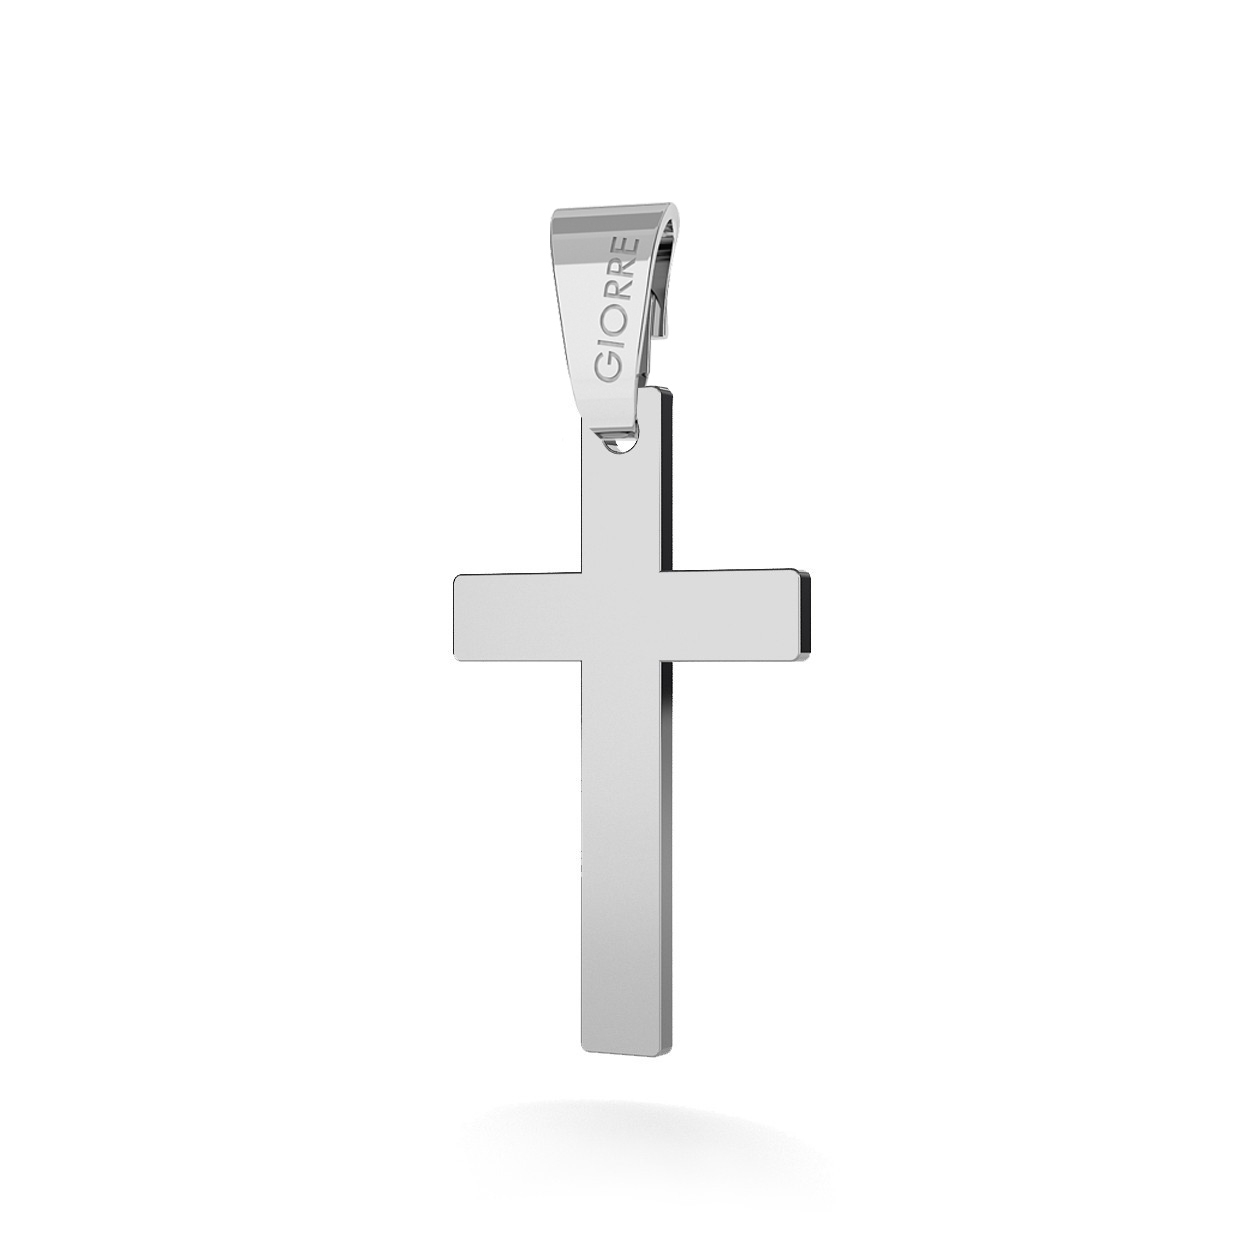 CHARM 27, CROSS, SILVER 925, RHODIUM OR GOLD PLATED